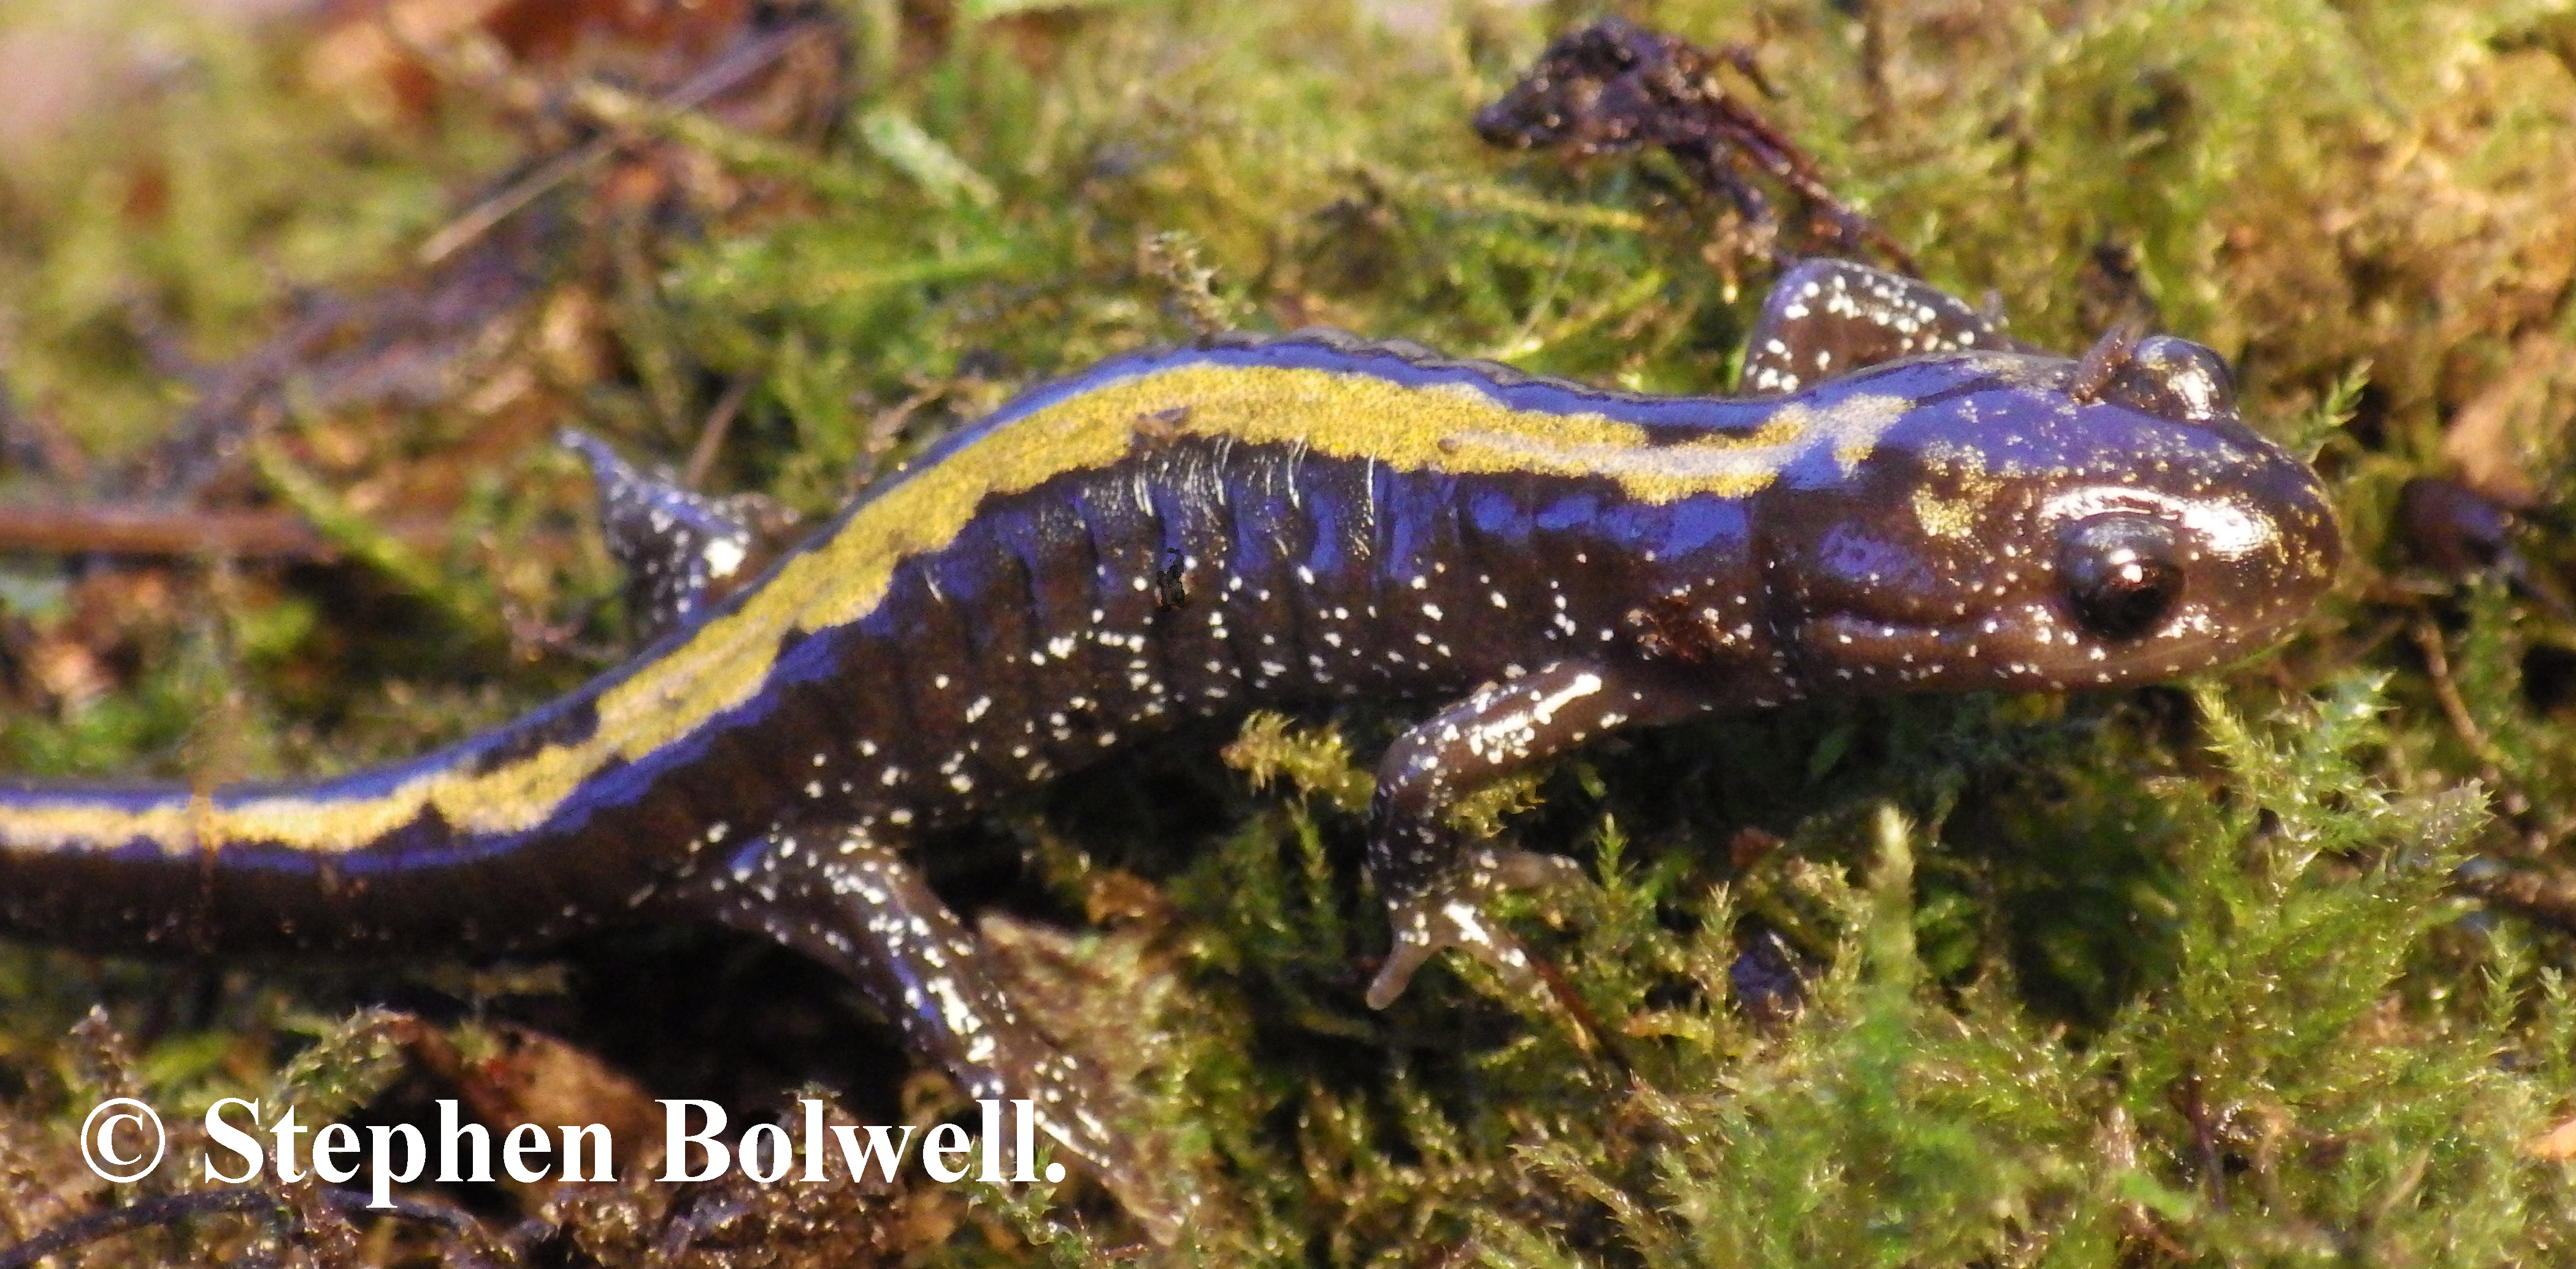 Long-toed salamanders tend to emerge at night and are seldom seen during the day. I know... What's the point if you never see them... Well, it's all about diversity which is a sure sign of a healthy environment.